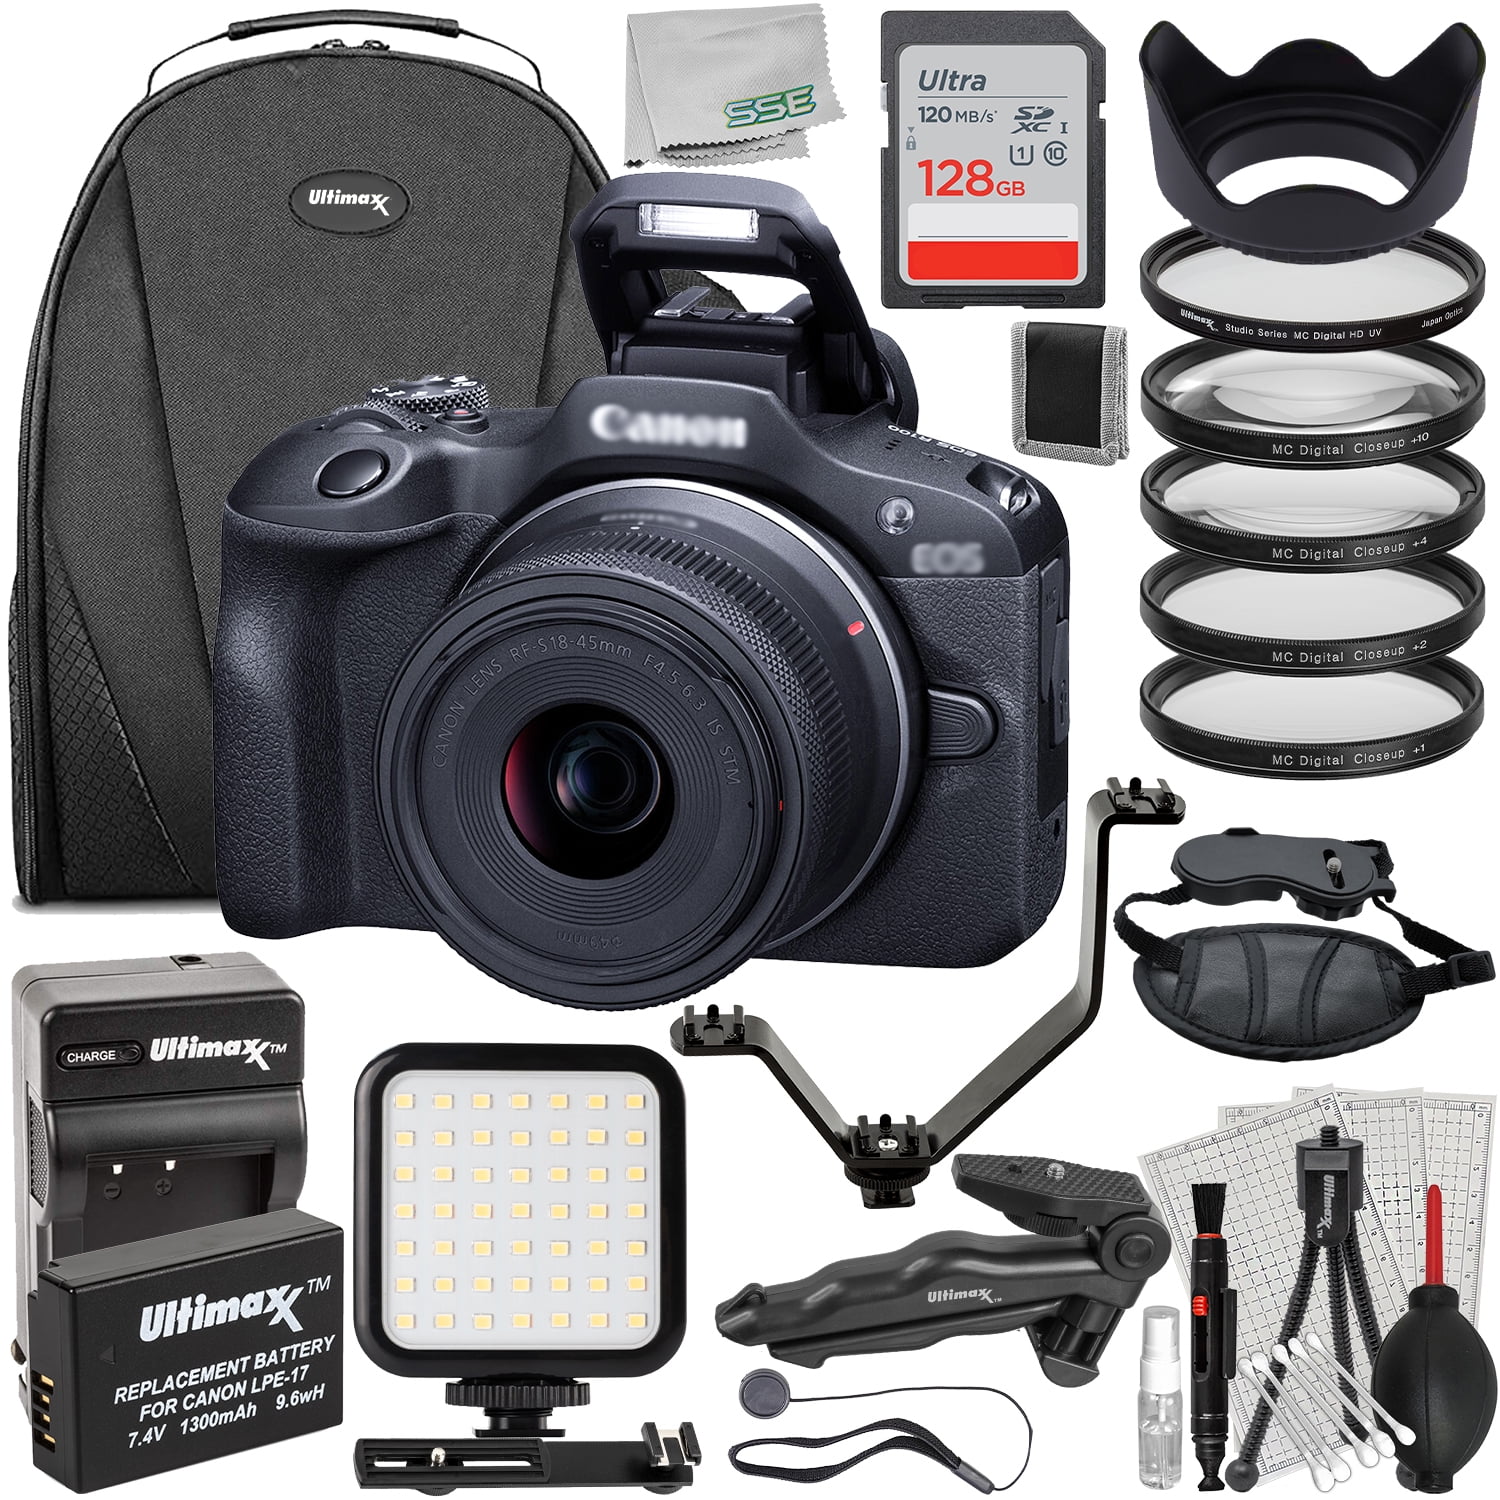 Canon EOS R100 Mirrorless Camera with 18-45mm Lens 6052C012 - 7PC Accessory  Kit 